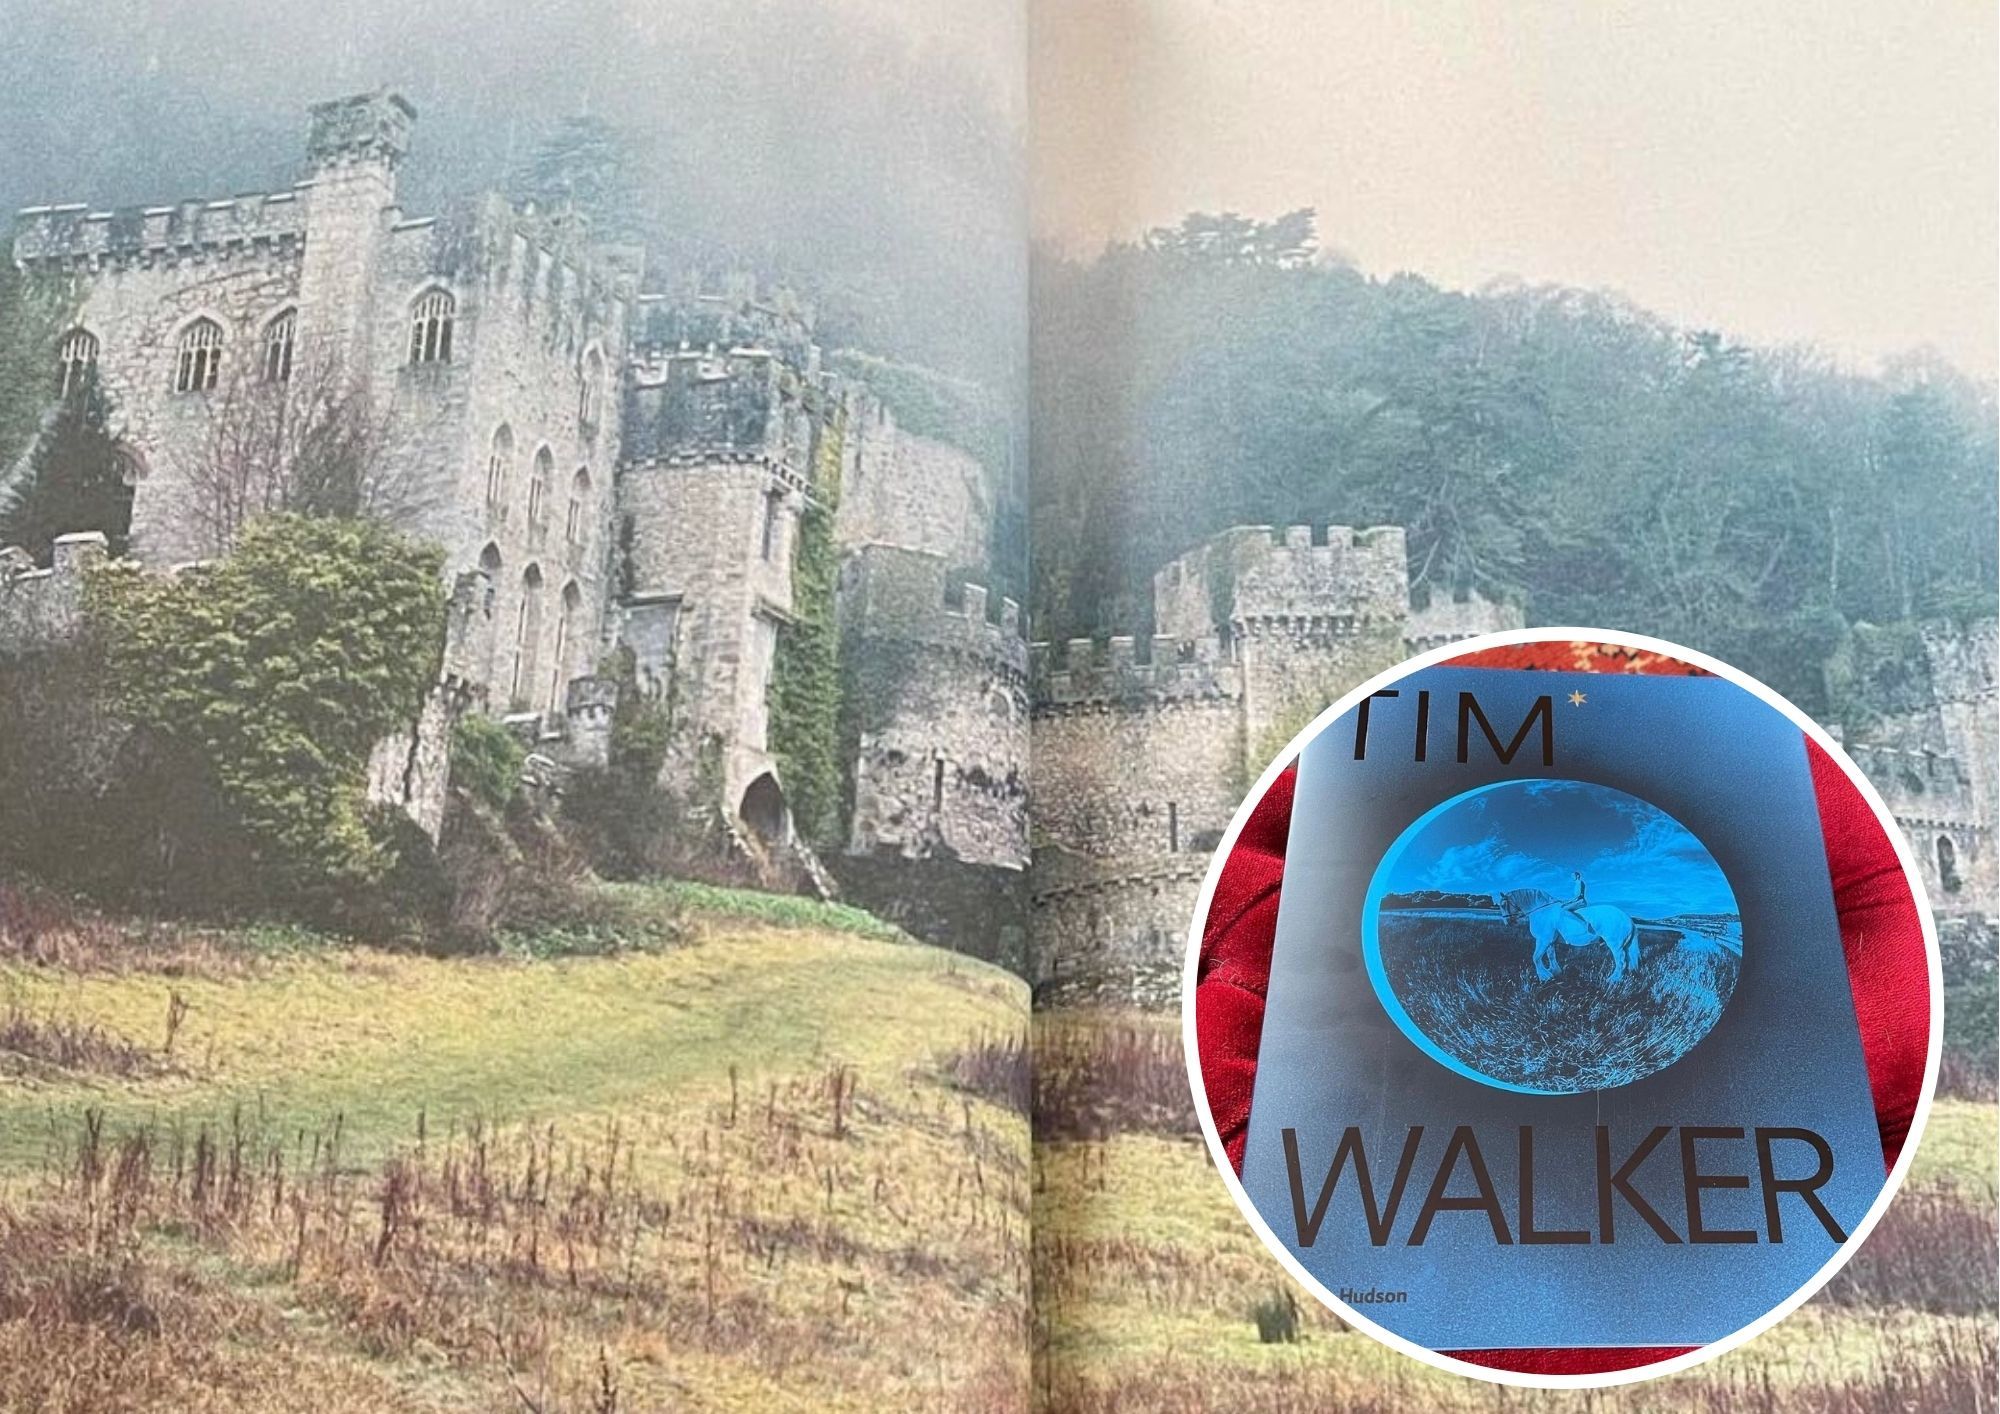 Tim Walkers previous photo shoot at the castle for Vogue was featured in his book: Shoot for the Moon. Picture: Gwrych Castle